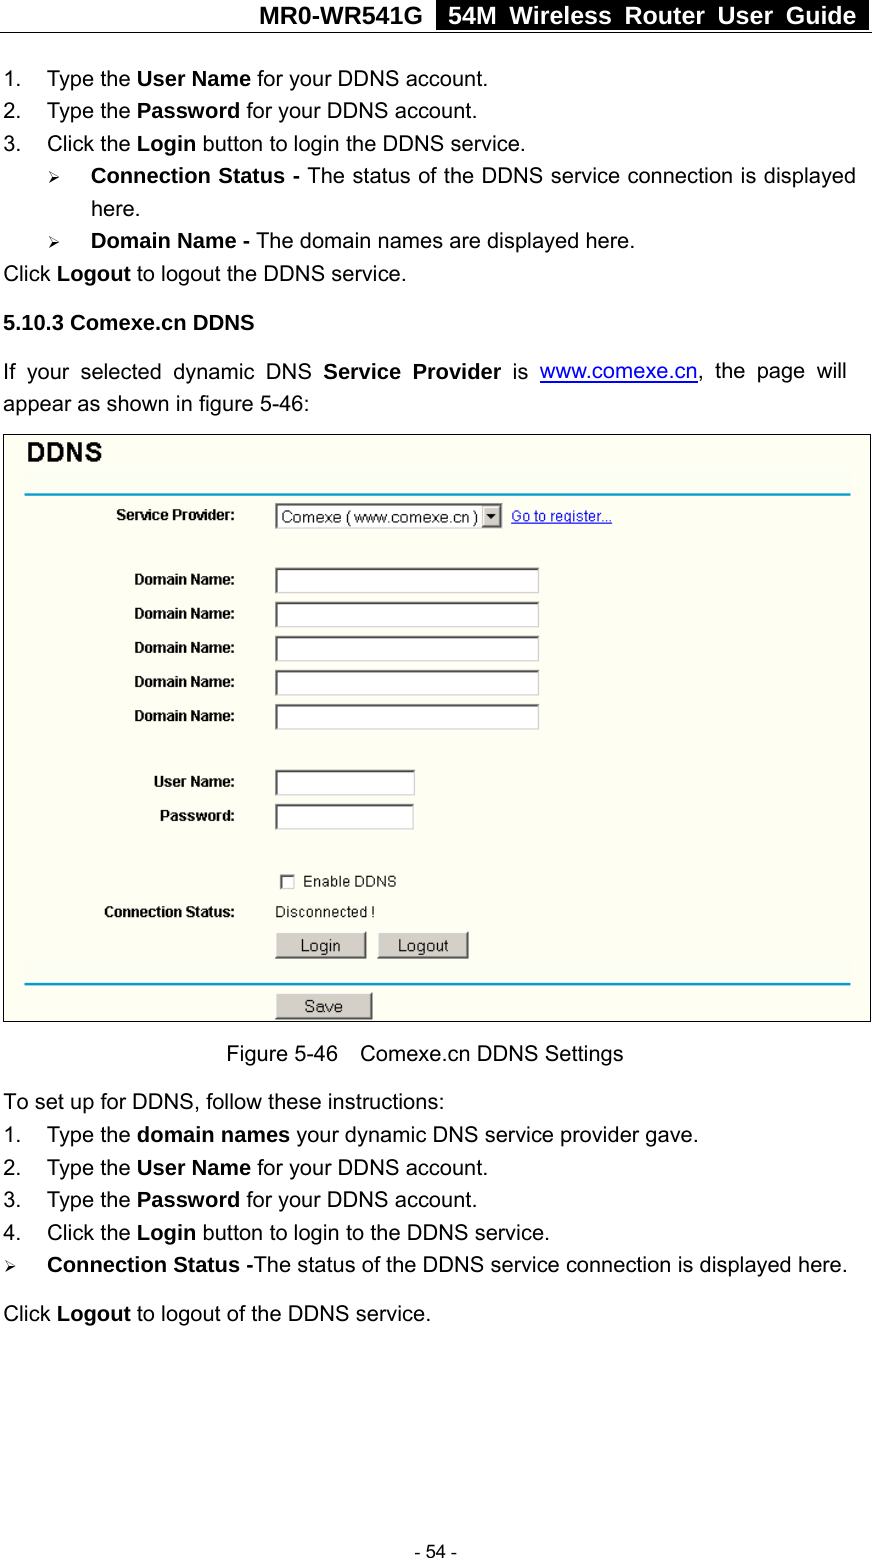 MR0-WR541G   54M Wireless Router User Guide  1. Type the User Name for your DDNS account.   2. Type the Password for your DDNS account.   3. Click the Login button to login the DDNS service.   ¾ Connection Status - The status of the DDNS service connection is displayed here. ¾ Domain Name - The domain names are displayed here. Click Logout to logout the DDNS service. 5.10.3 Comexe.cn DDNS If your selected dynamic DNS Service Provider is www.comexe.cn, the page will appear as shown in figure 5-46:  Figure 5-46    Comexe.cn DDNS Settings To set up for DDNS, follow these instructions: 1. Type the domain names your dynamic DNS service provider gave.   2. Type the User Name for your DDNS account.   3. Type the Password for your DDNS account.   4. Click the Login button to login to the DDNS service. ¾ Connection Status -The status of the DDNS service connection is displayed here. Click Logout to logout of the DDNS service.  - 54 - 